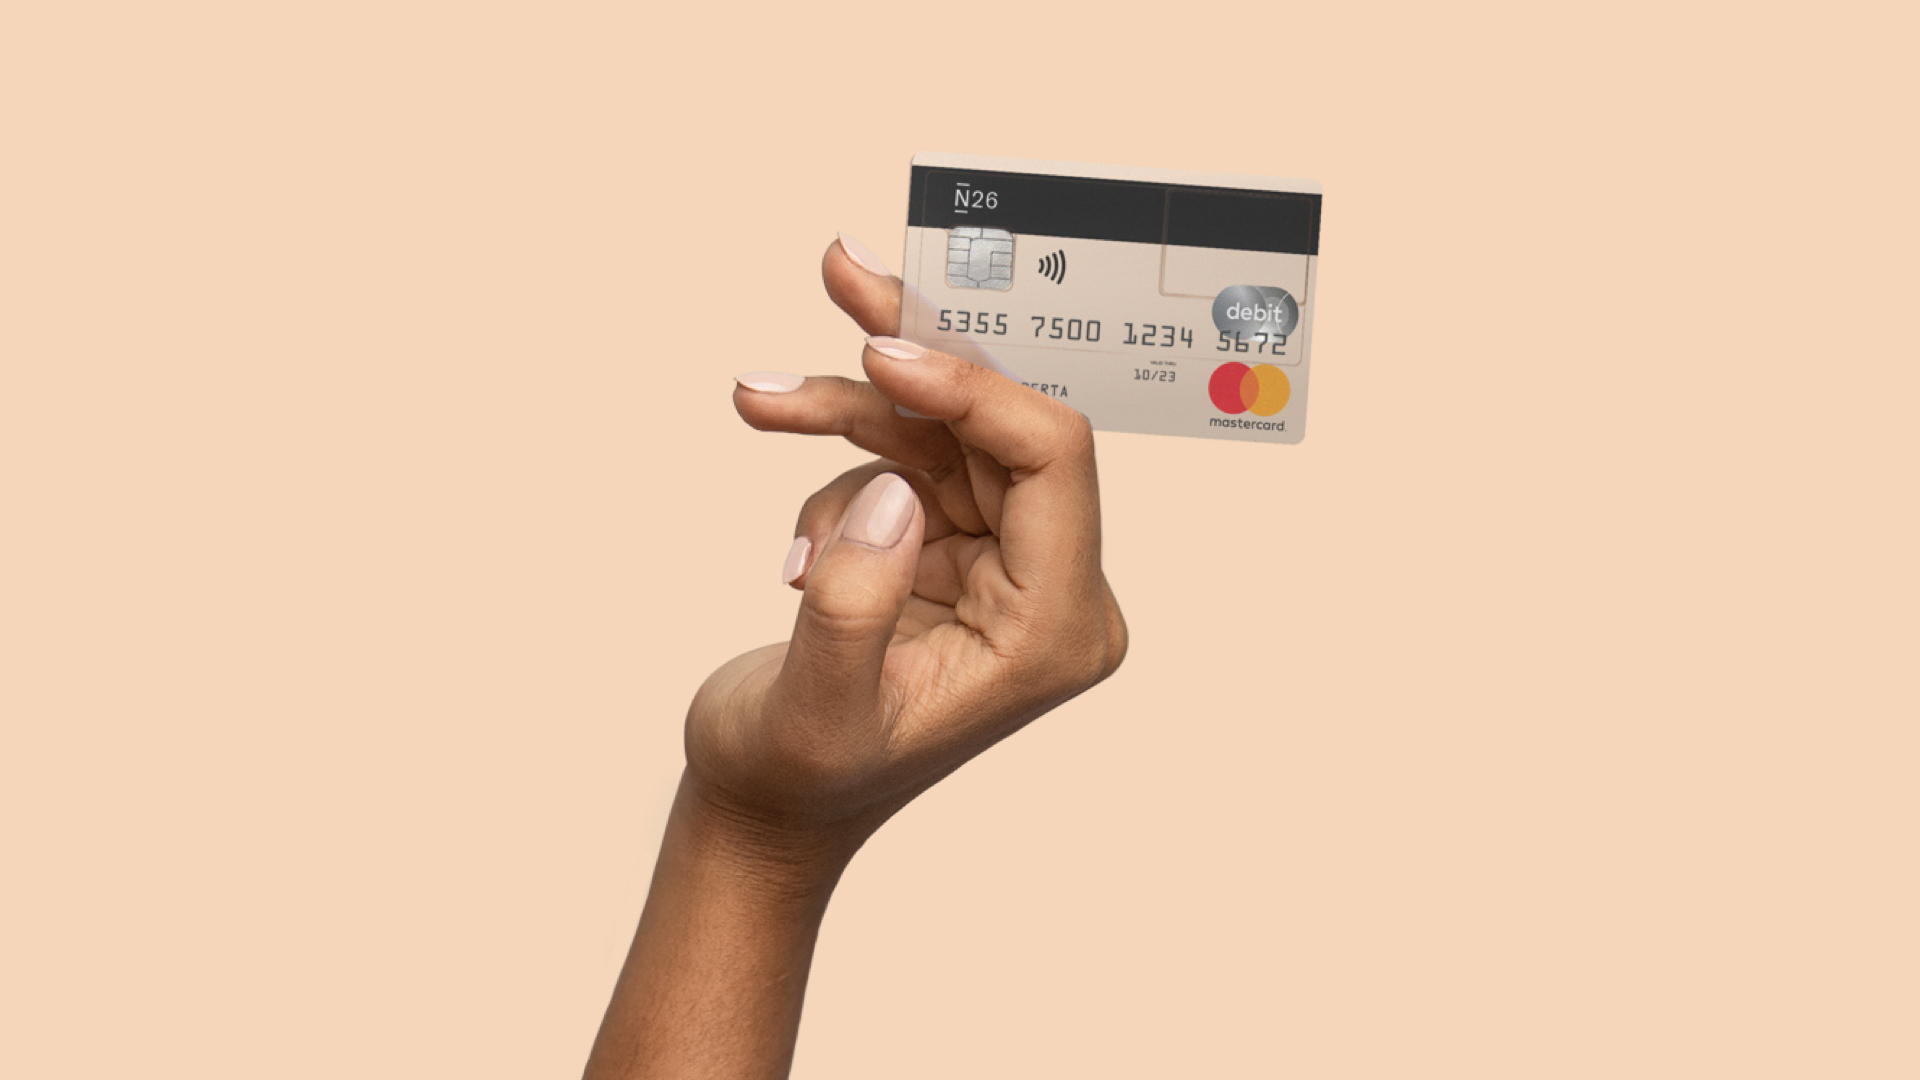 N26 Press Image of our 26 reasons campaign with a hand holding a free bank account mastercard debitcard